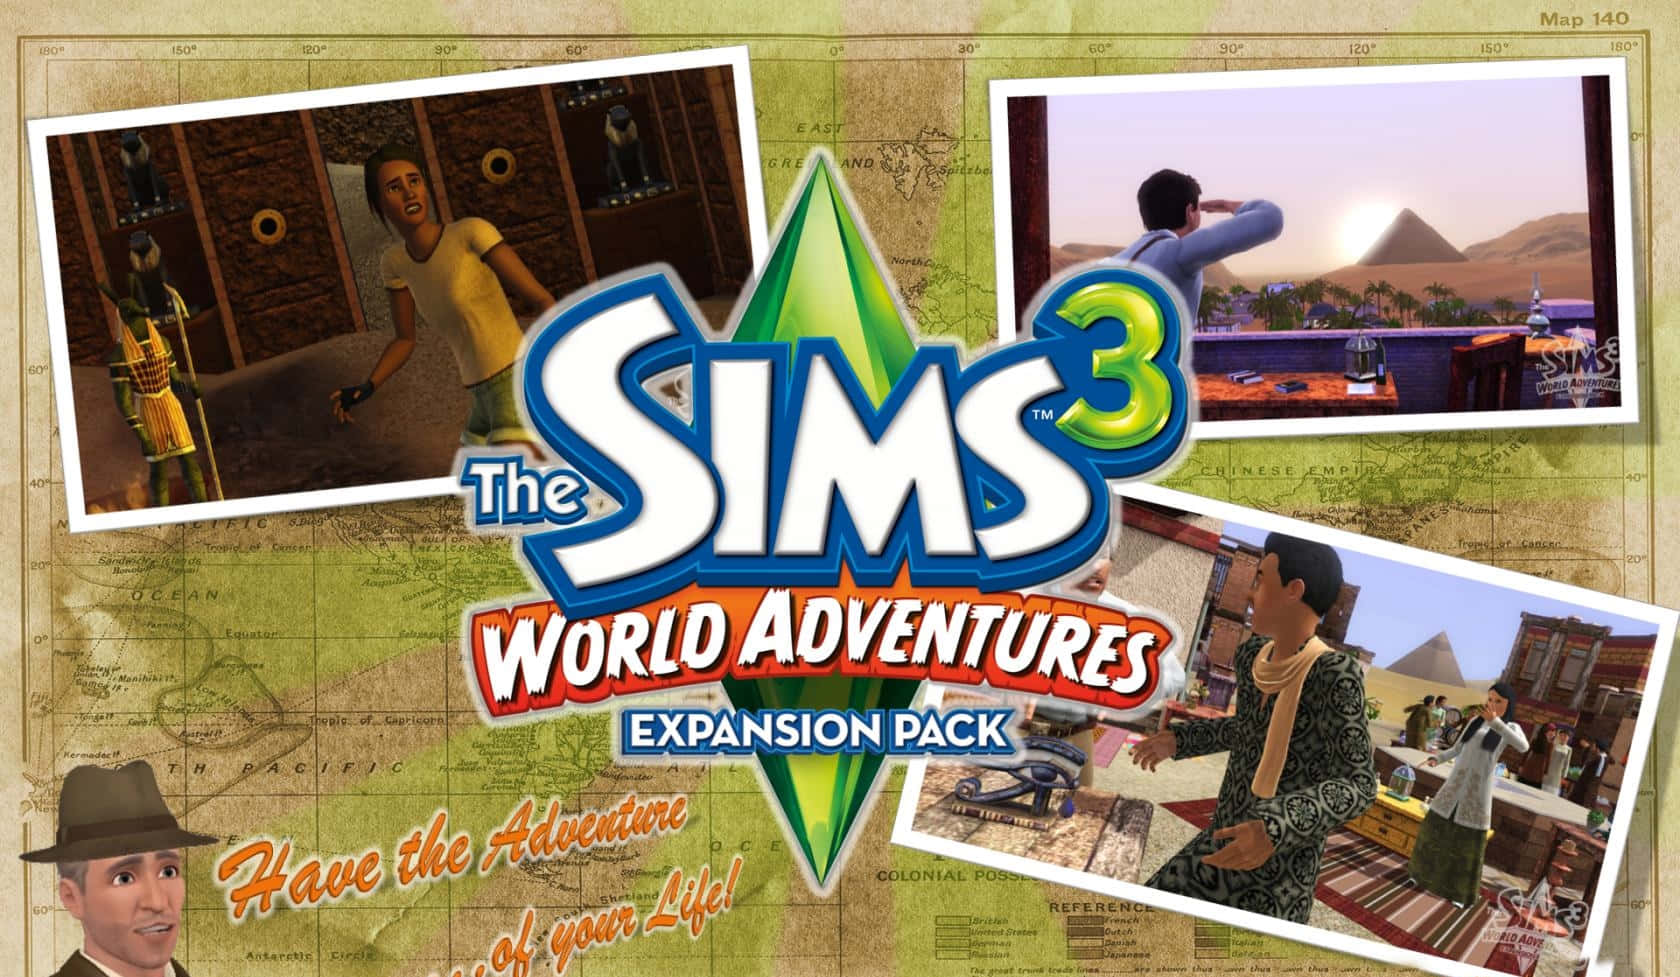 Get ready for an exciting new experience – with The Sims 3 Wallpaper